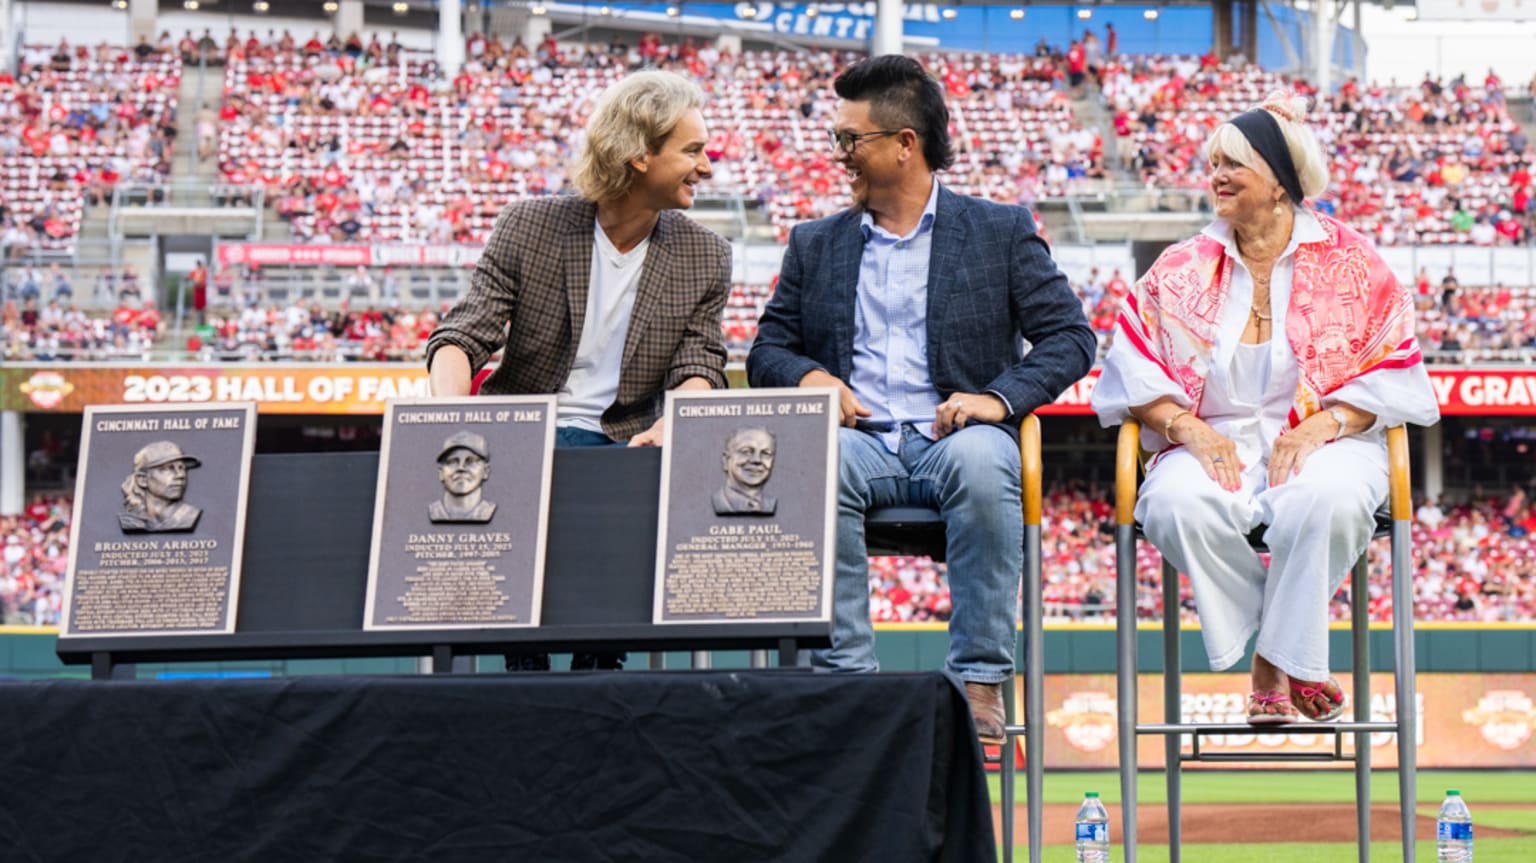 Bronson Arroyo to be inducted into Cincinnati Reds Hall of Fame in 2023